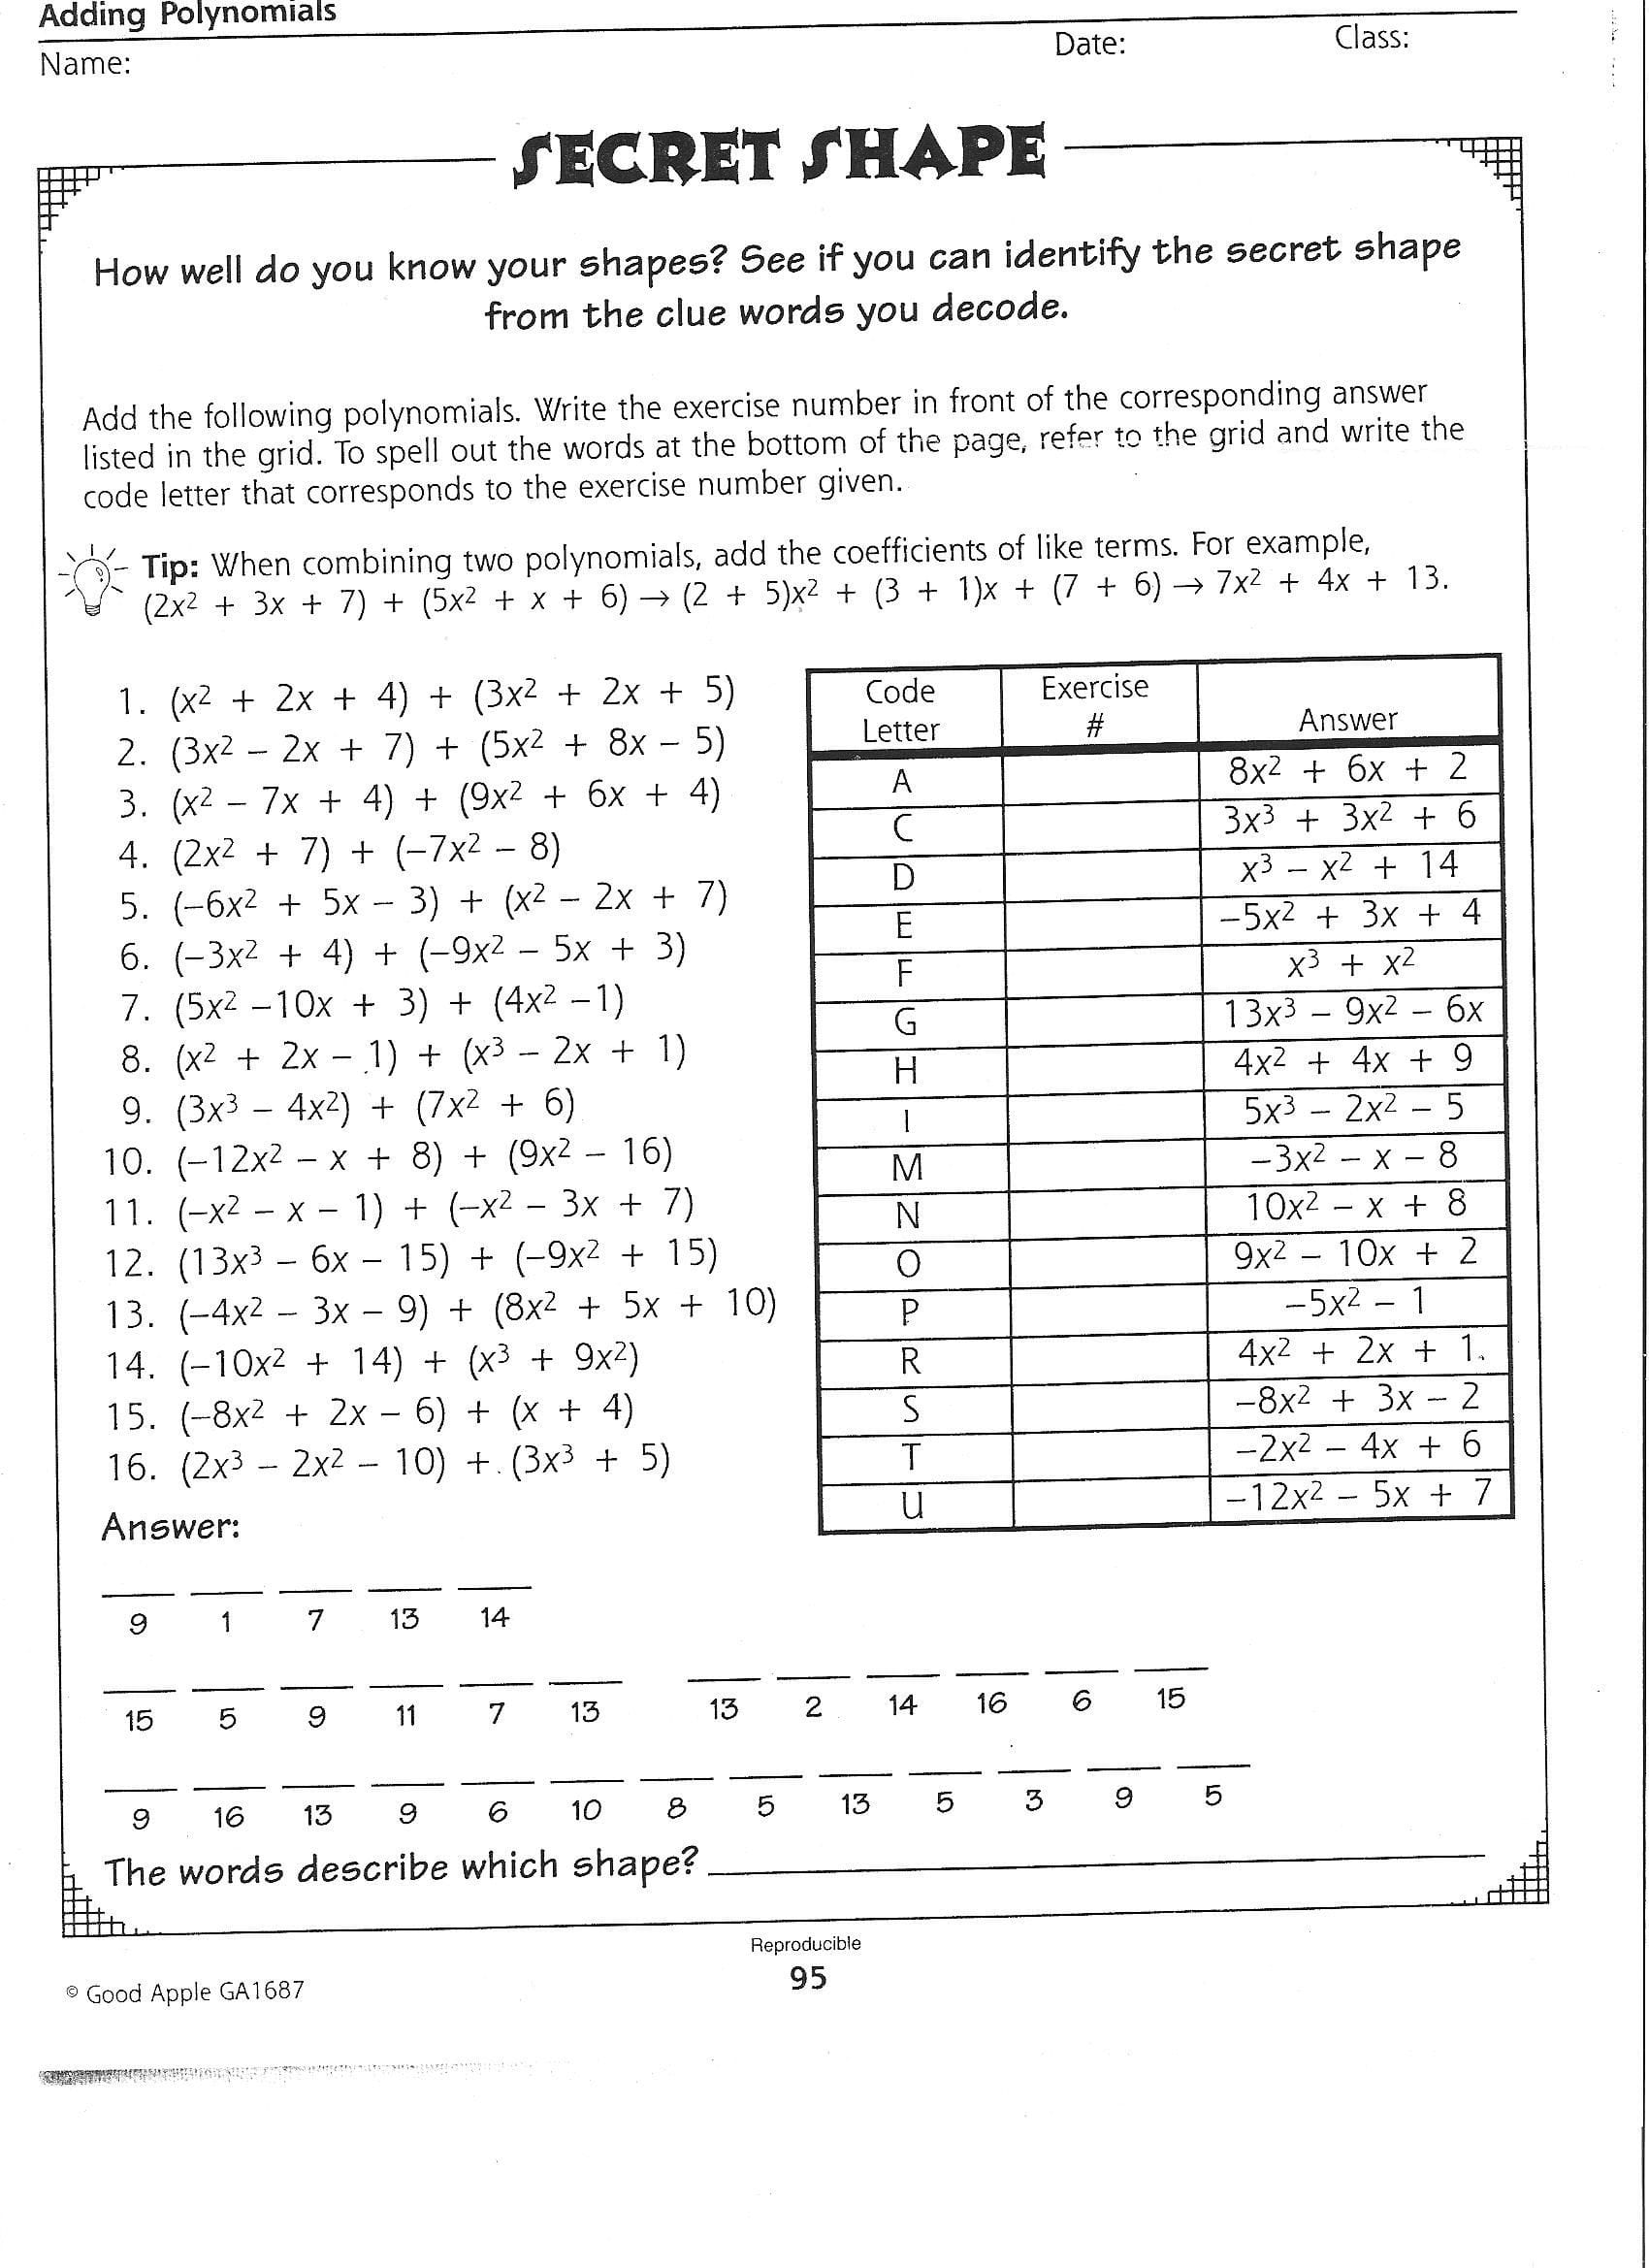 Free Math Worksheets Synthetic Division